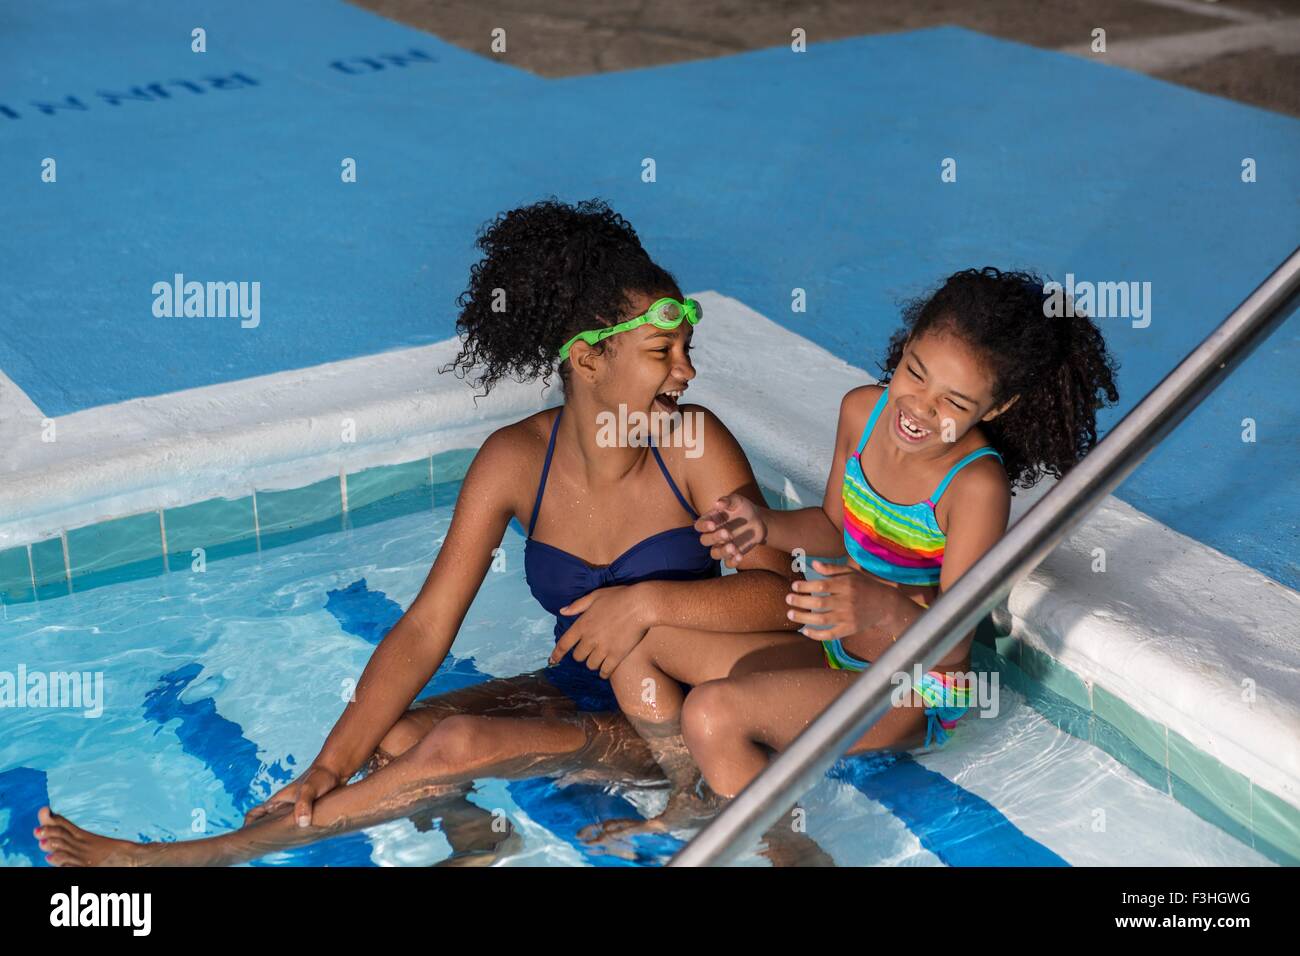 High angle view of girls sitting in swimming pool side by side laughing Stock Photo